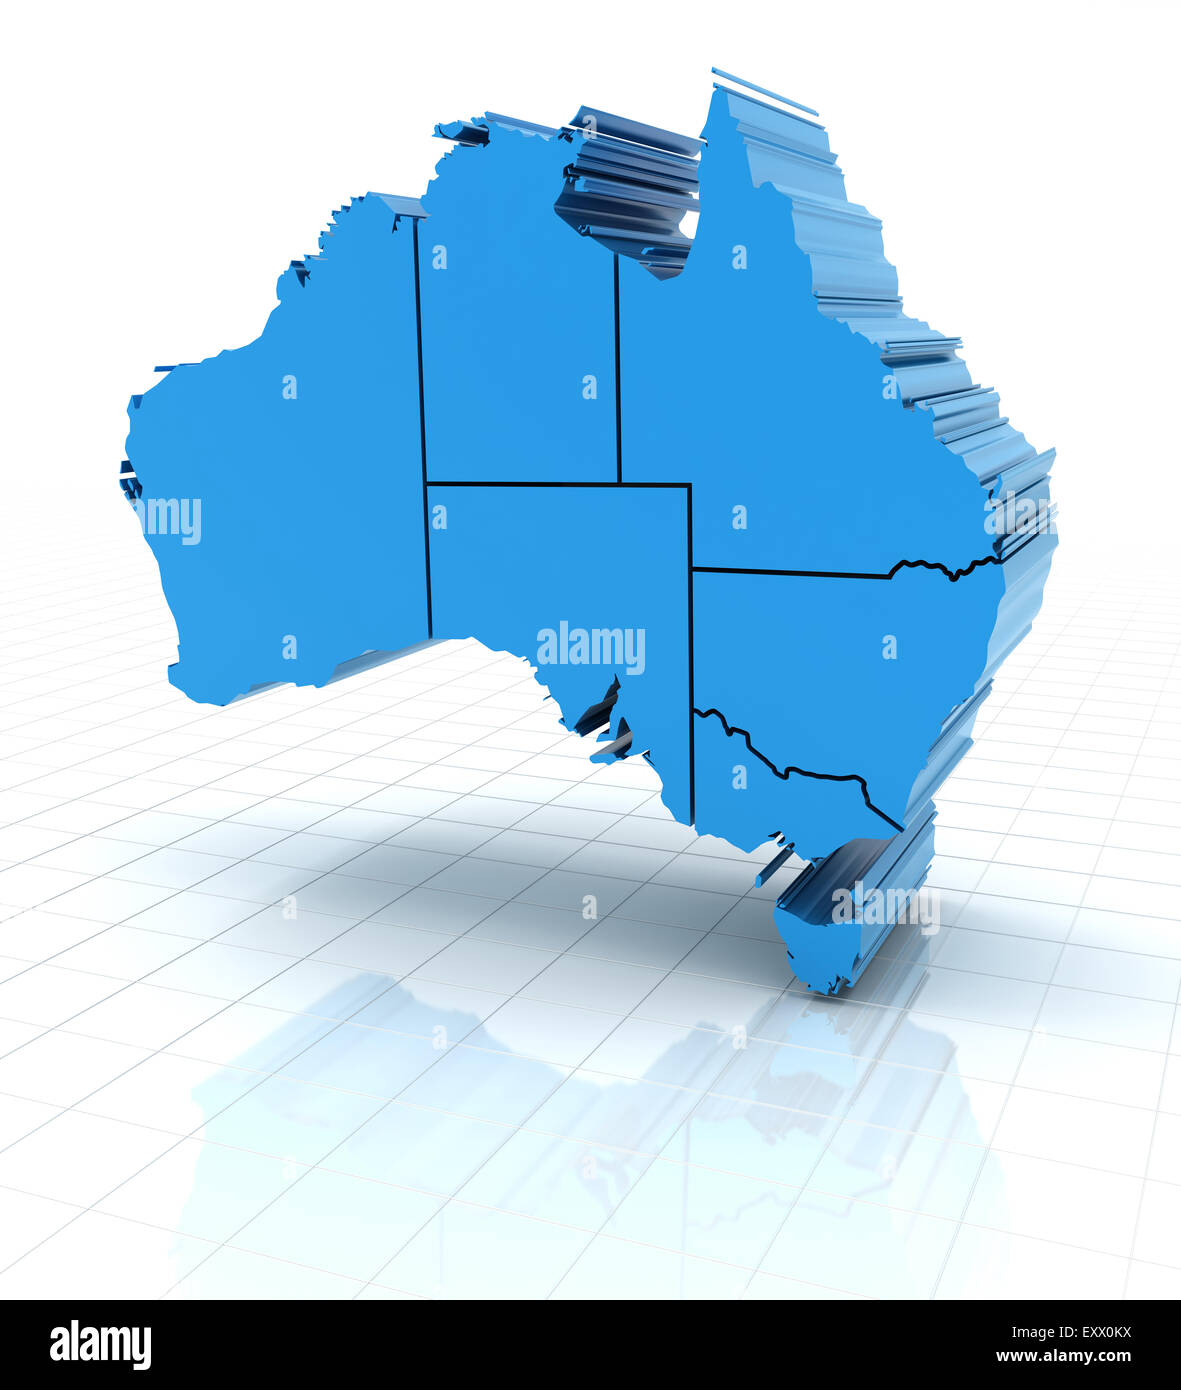 Extruded Australia map with state borders Stock Photo